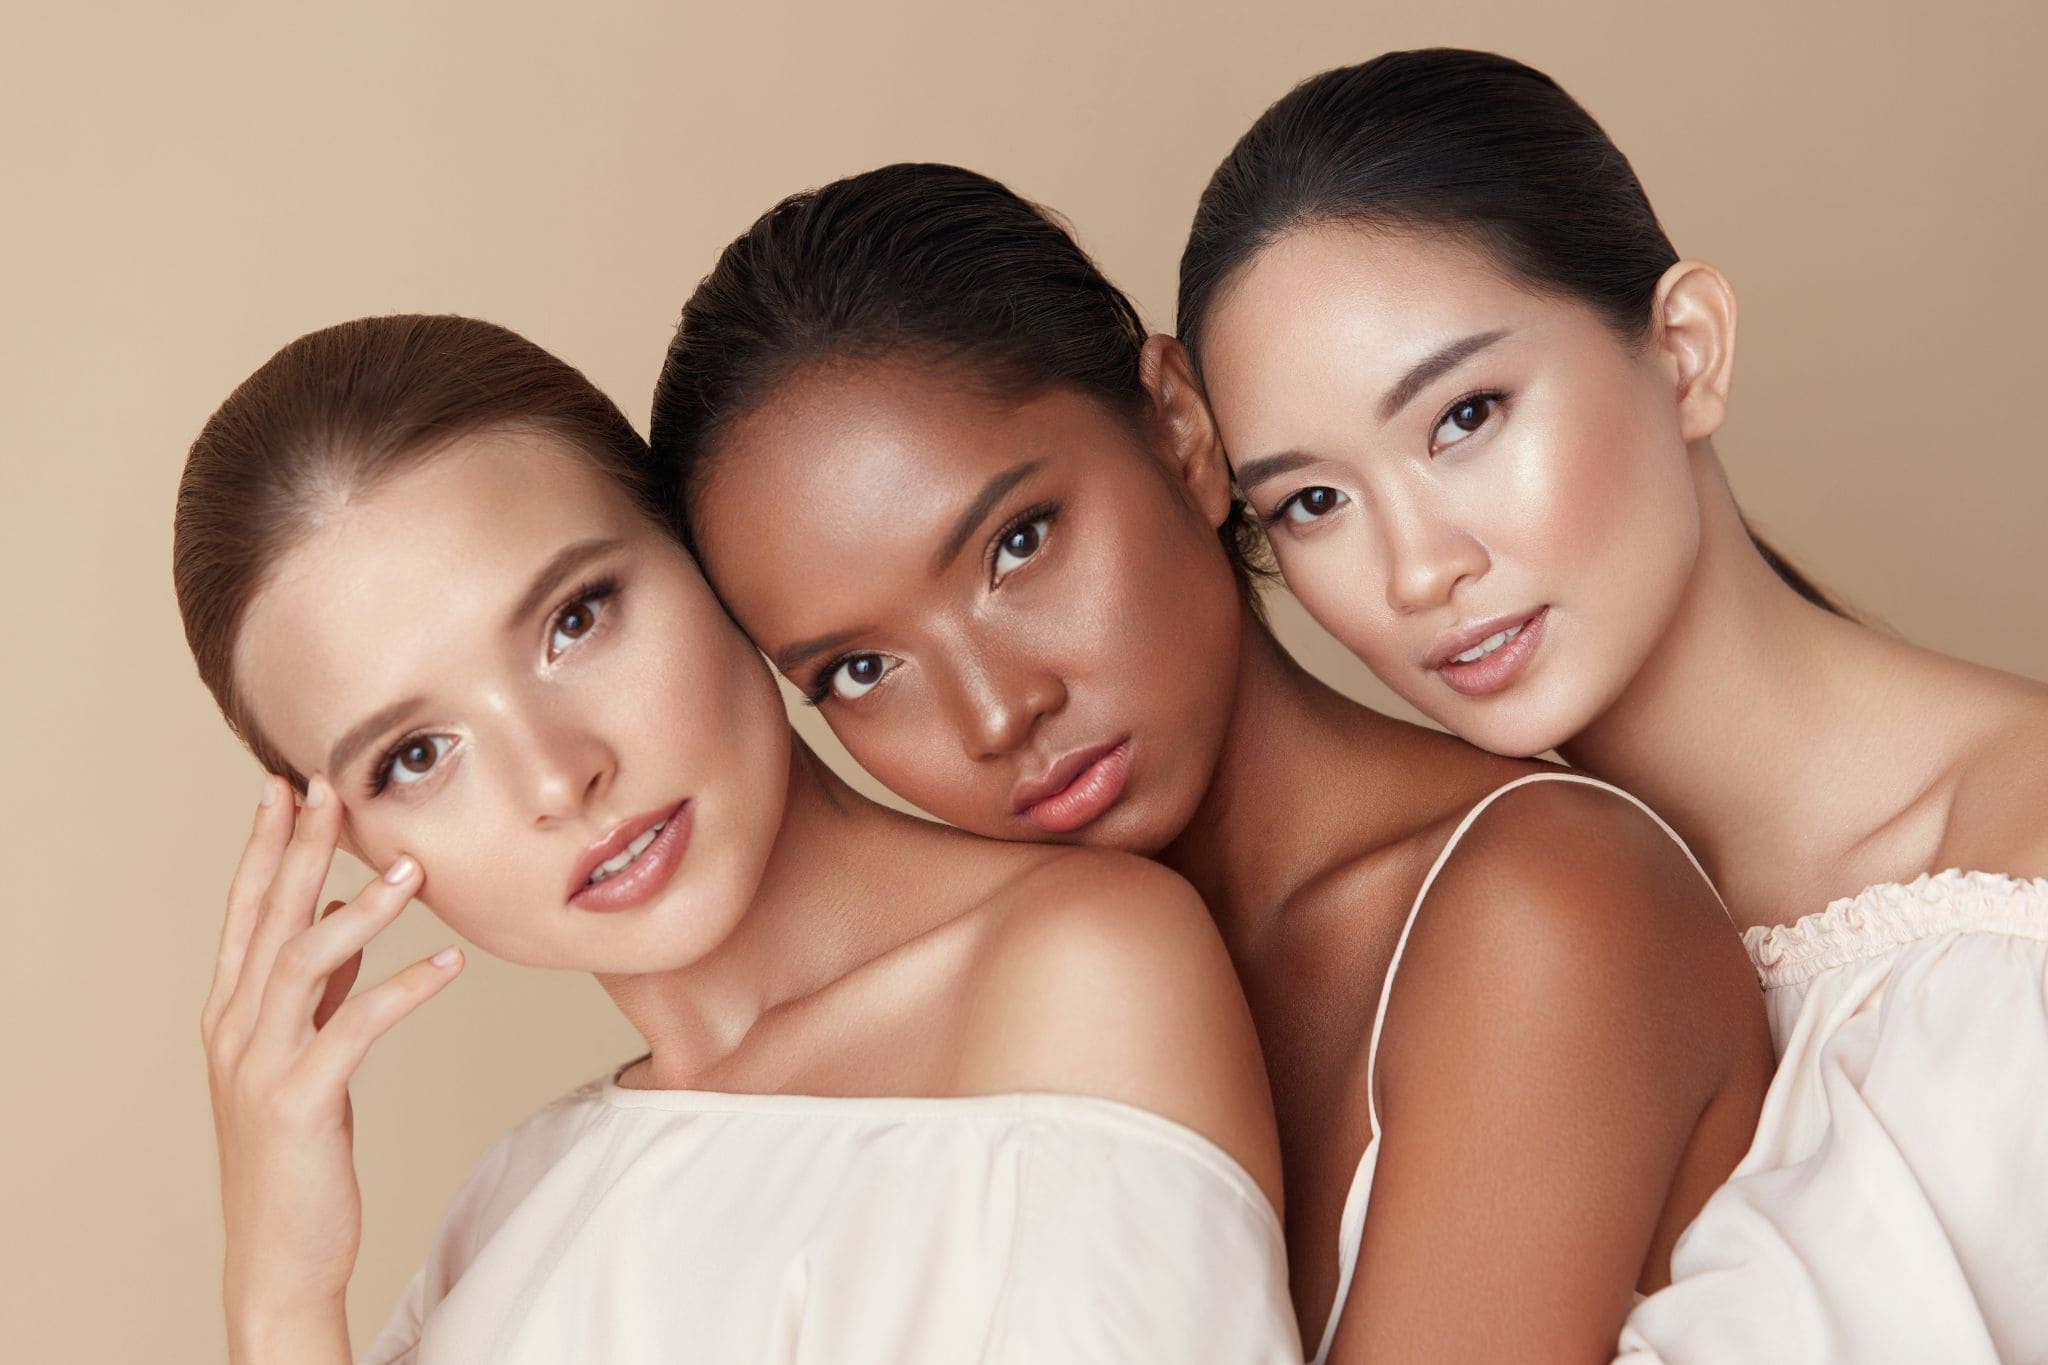 Looking for a foundation that provides great coverage without looking cakey? Undertone Foundation from Baily Cosmetics is perfect for you! Natural and vegan, this foundation will give you a beautiful, natural finish.